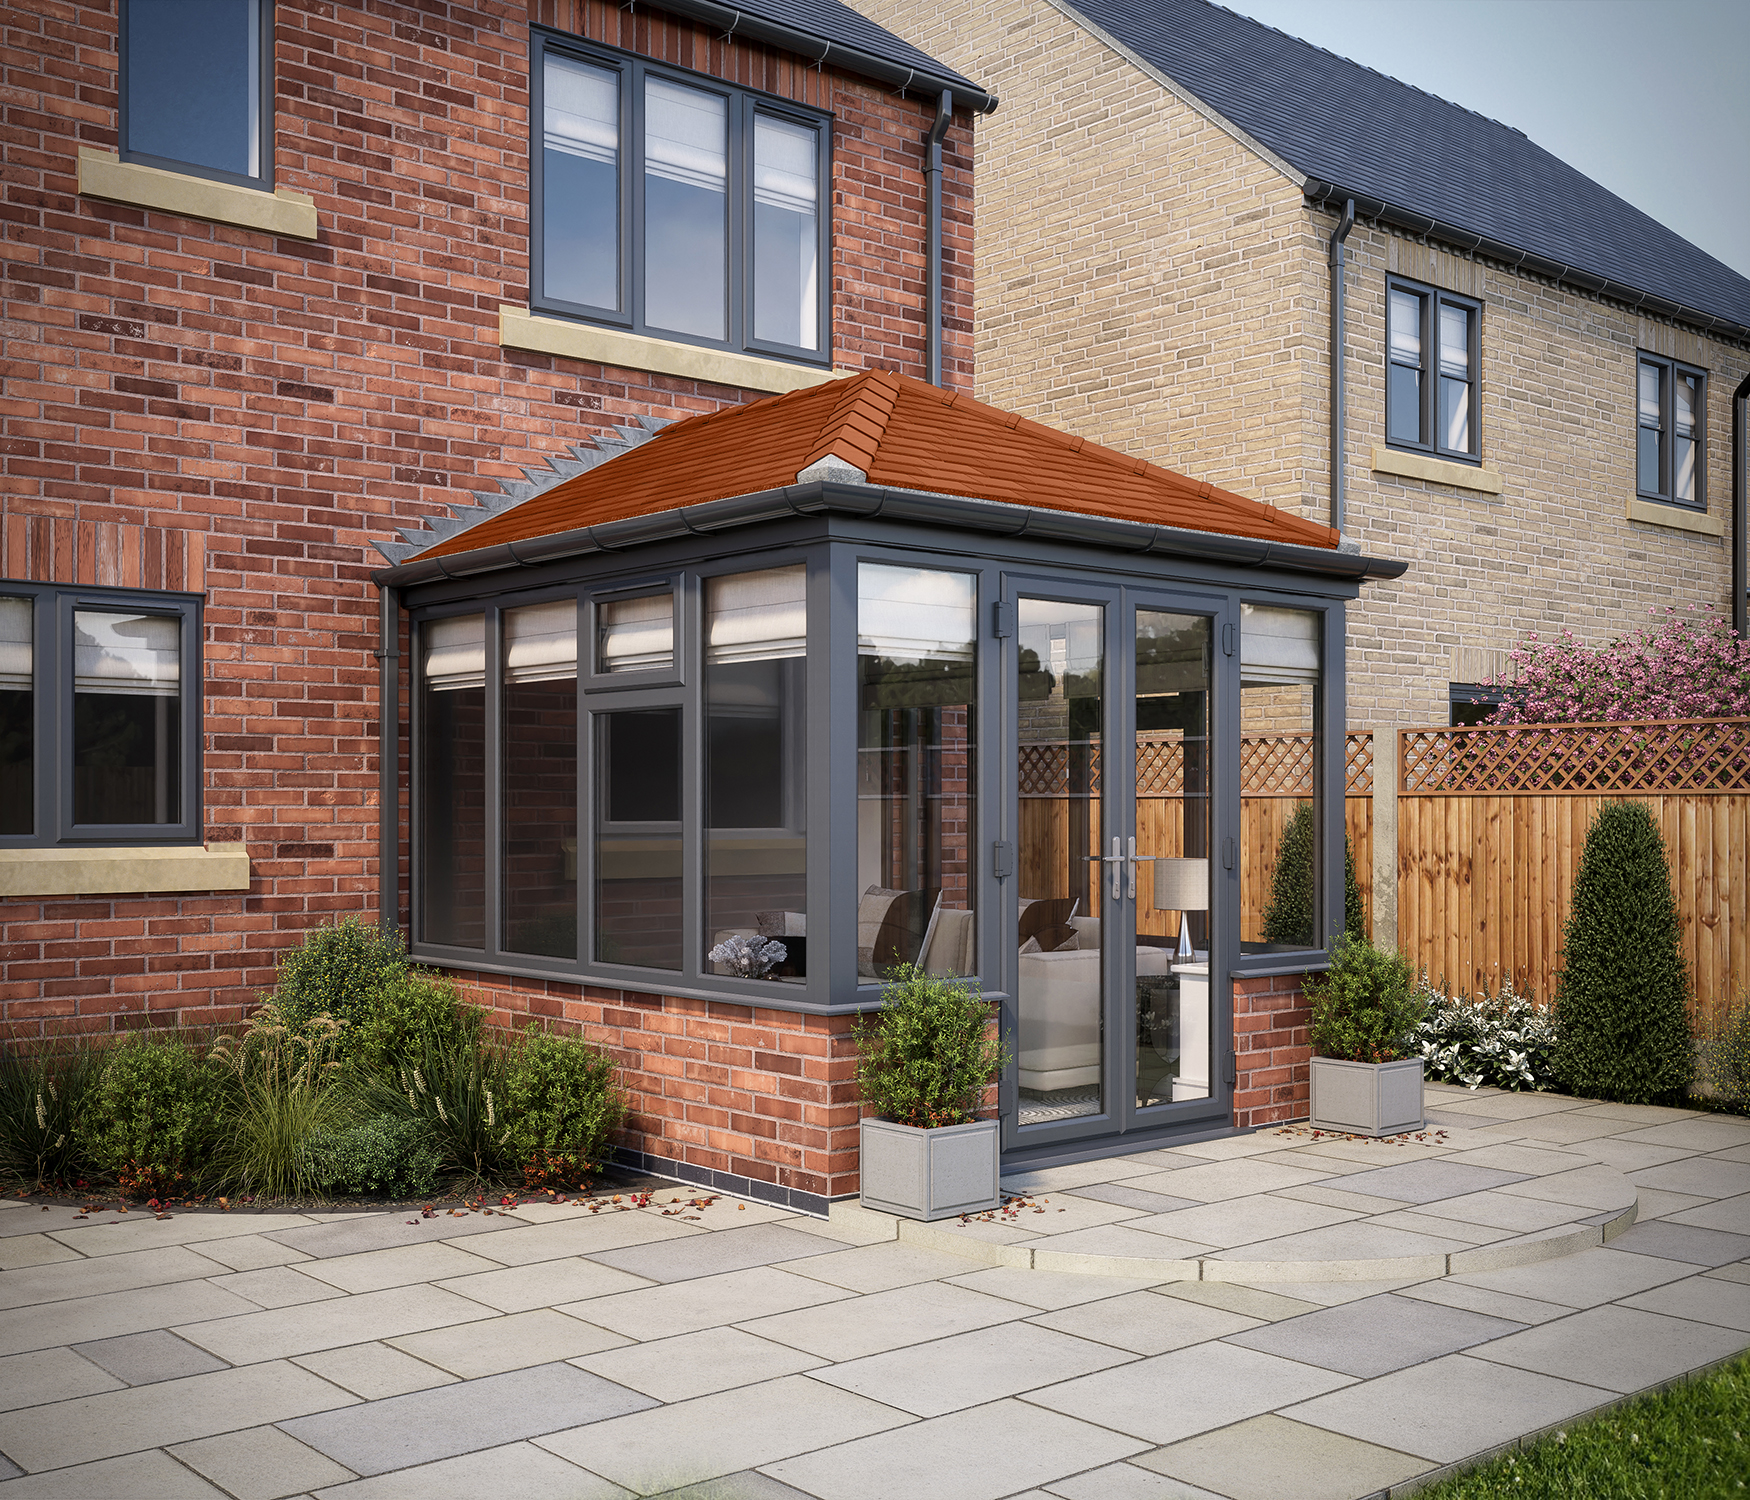 Image of SOLid Roof Edwardian Conservatory Grey Frames Dwarf Wall with Rustic Terracotta Tiles - 13 x 10ft